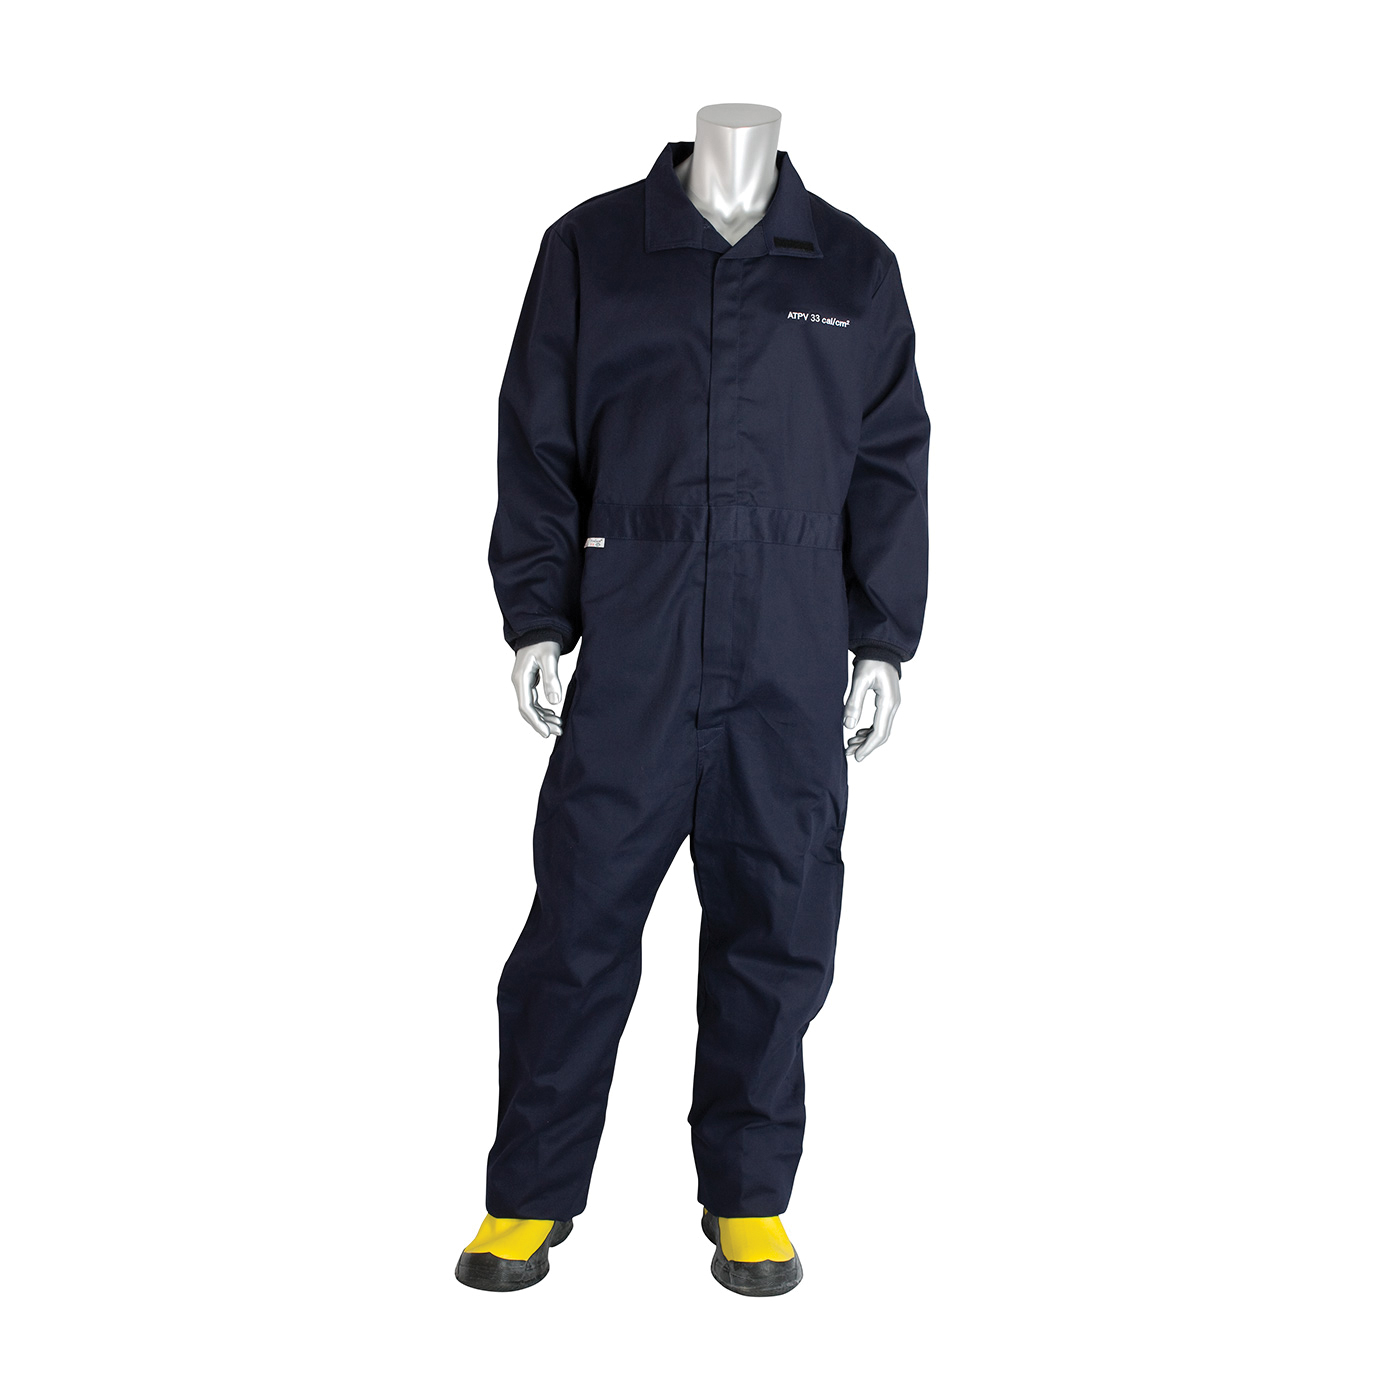 PIP® 9100-52758/6XL Flame Resistant Coverall, 6XL, Navy, 88% Cotton/12% Nylon, 68 to 70 in Chest, 32 in L Inseam